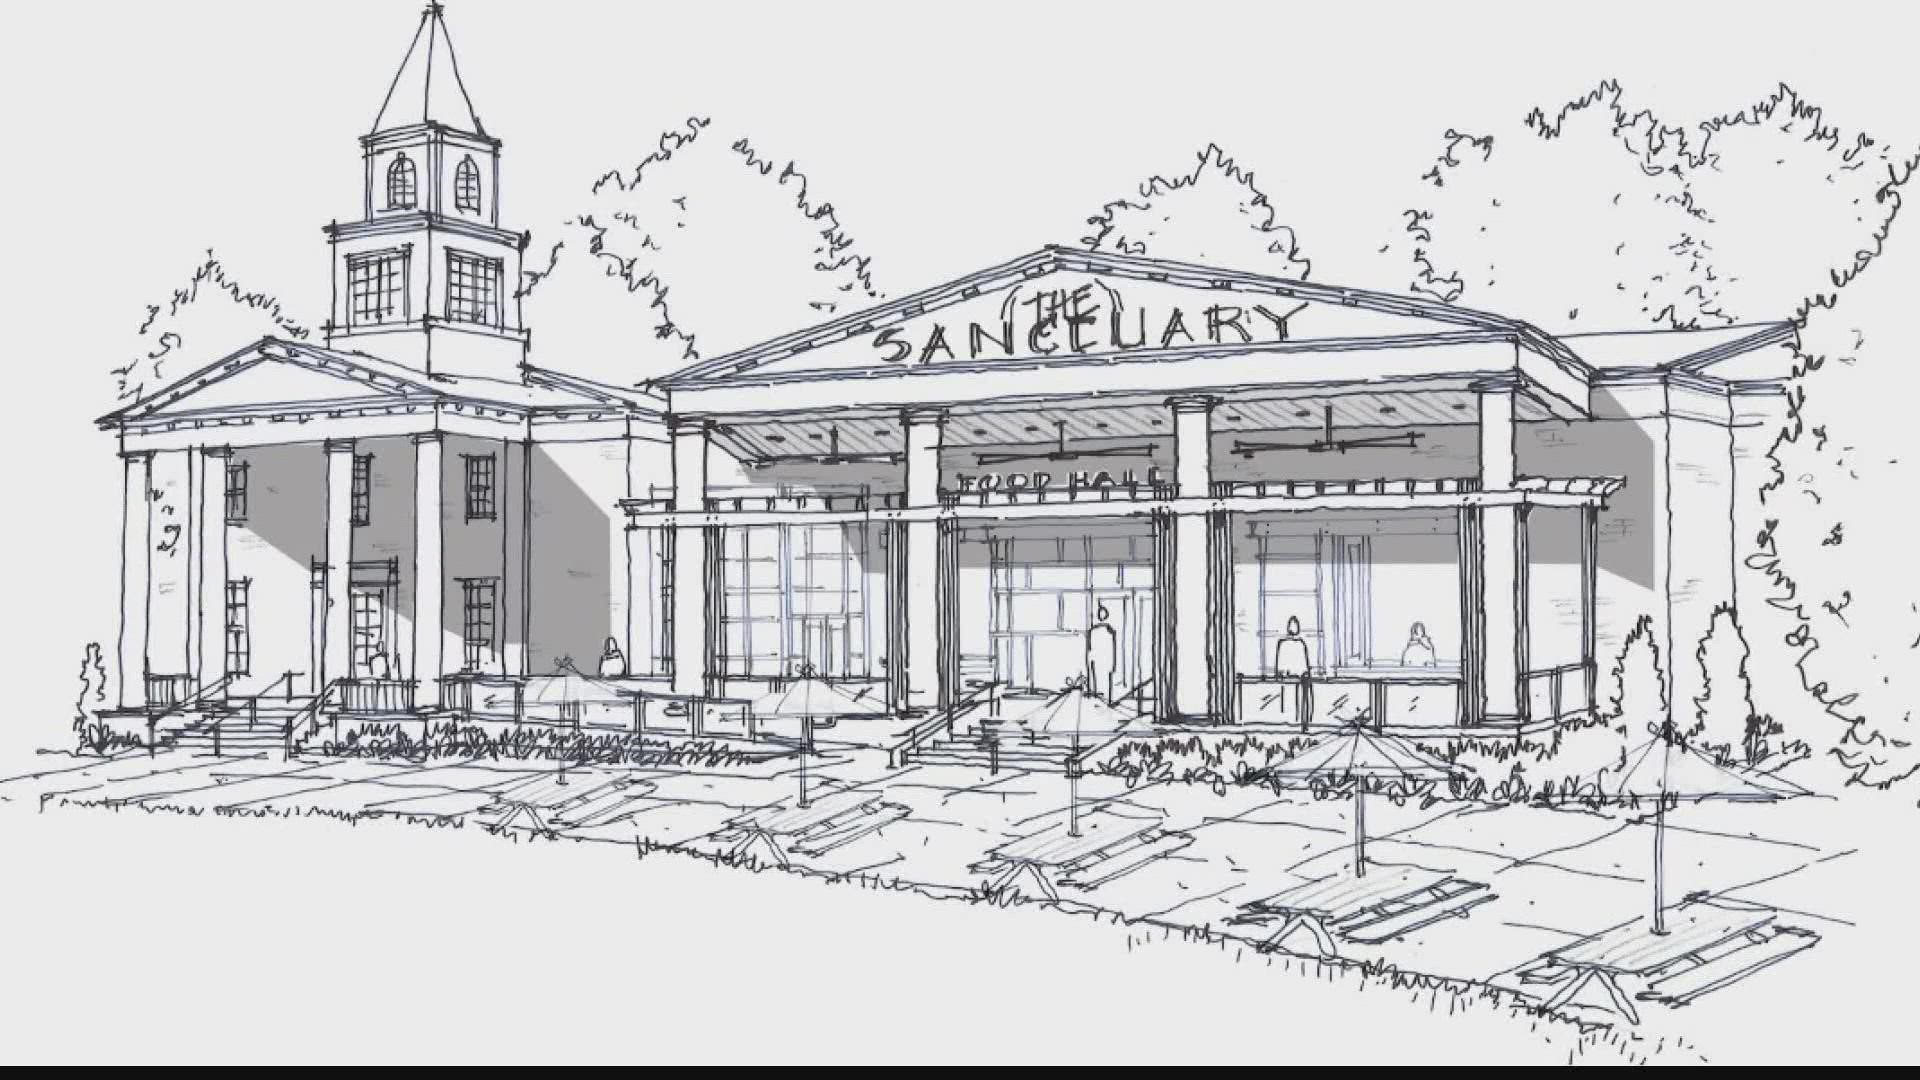 The company behind the latest addition to the BullStreet District has confirmed the location of the planned Sanctuary Food Hall and set an opening date.